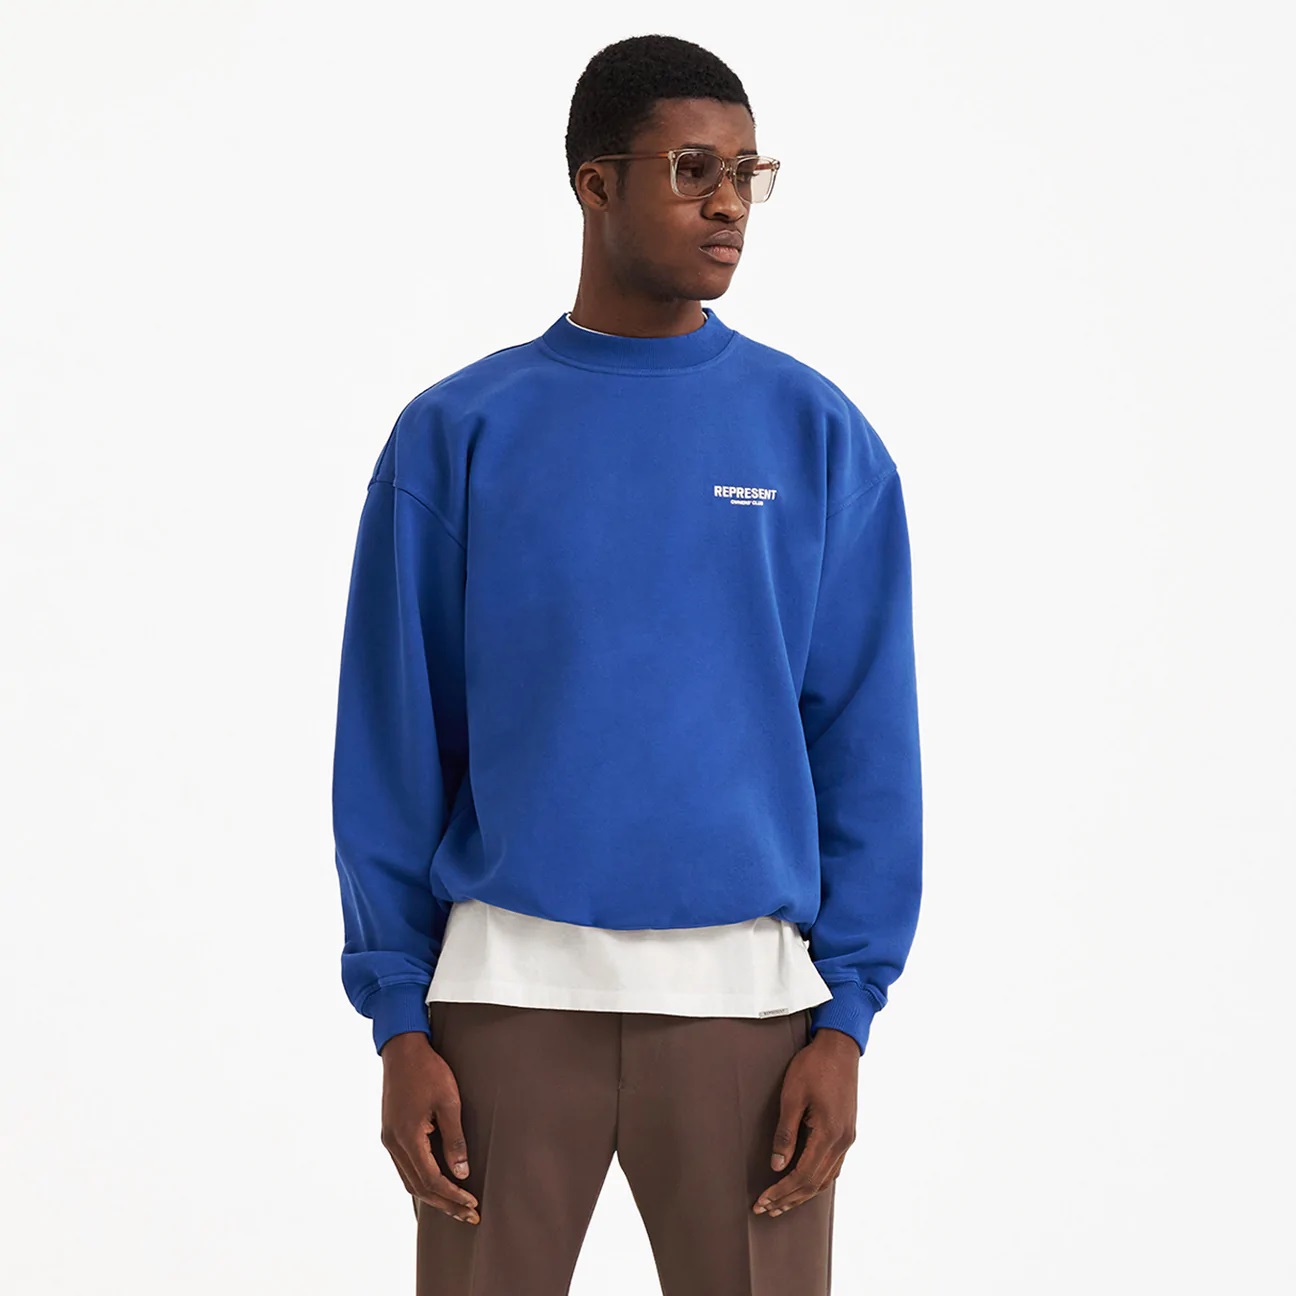 Represent Owners Club Sweater in Cobalt